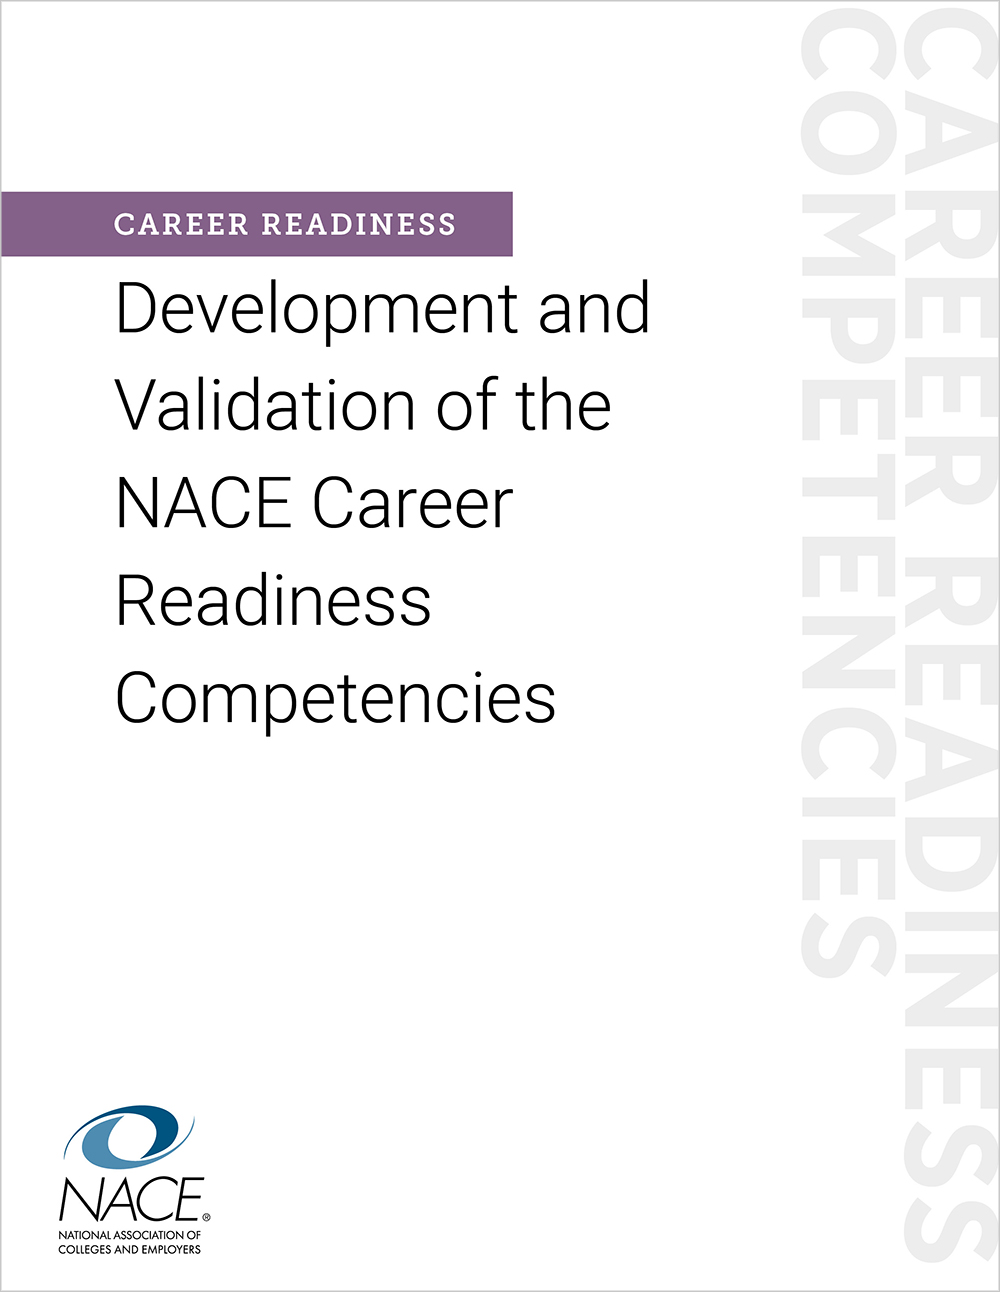 Development and Validation of the NACE Career Readiness Competencies